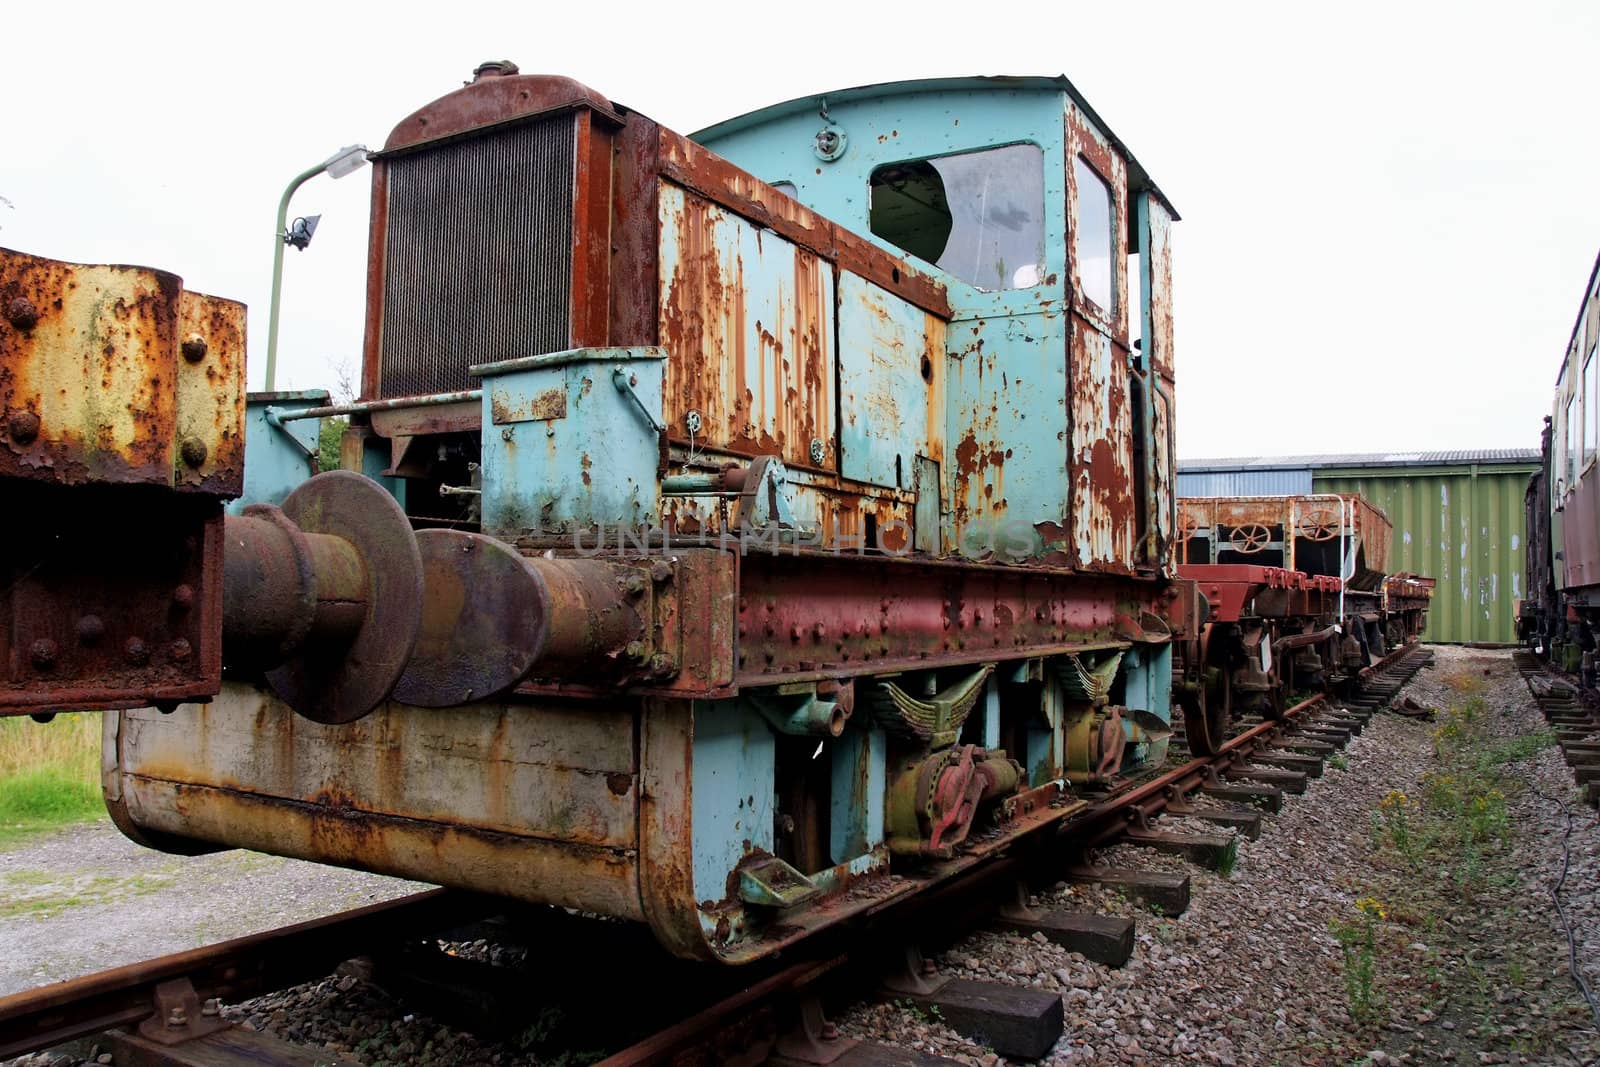 Vintage diesel powered train being renovated. Rusty condition